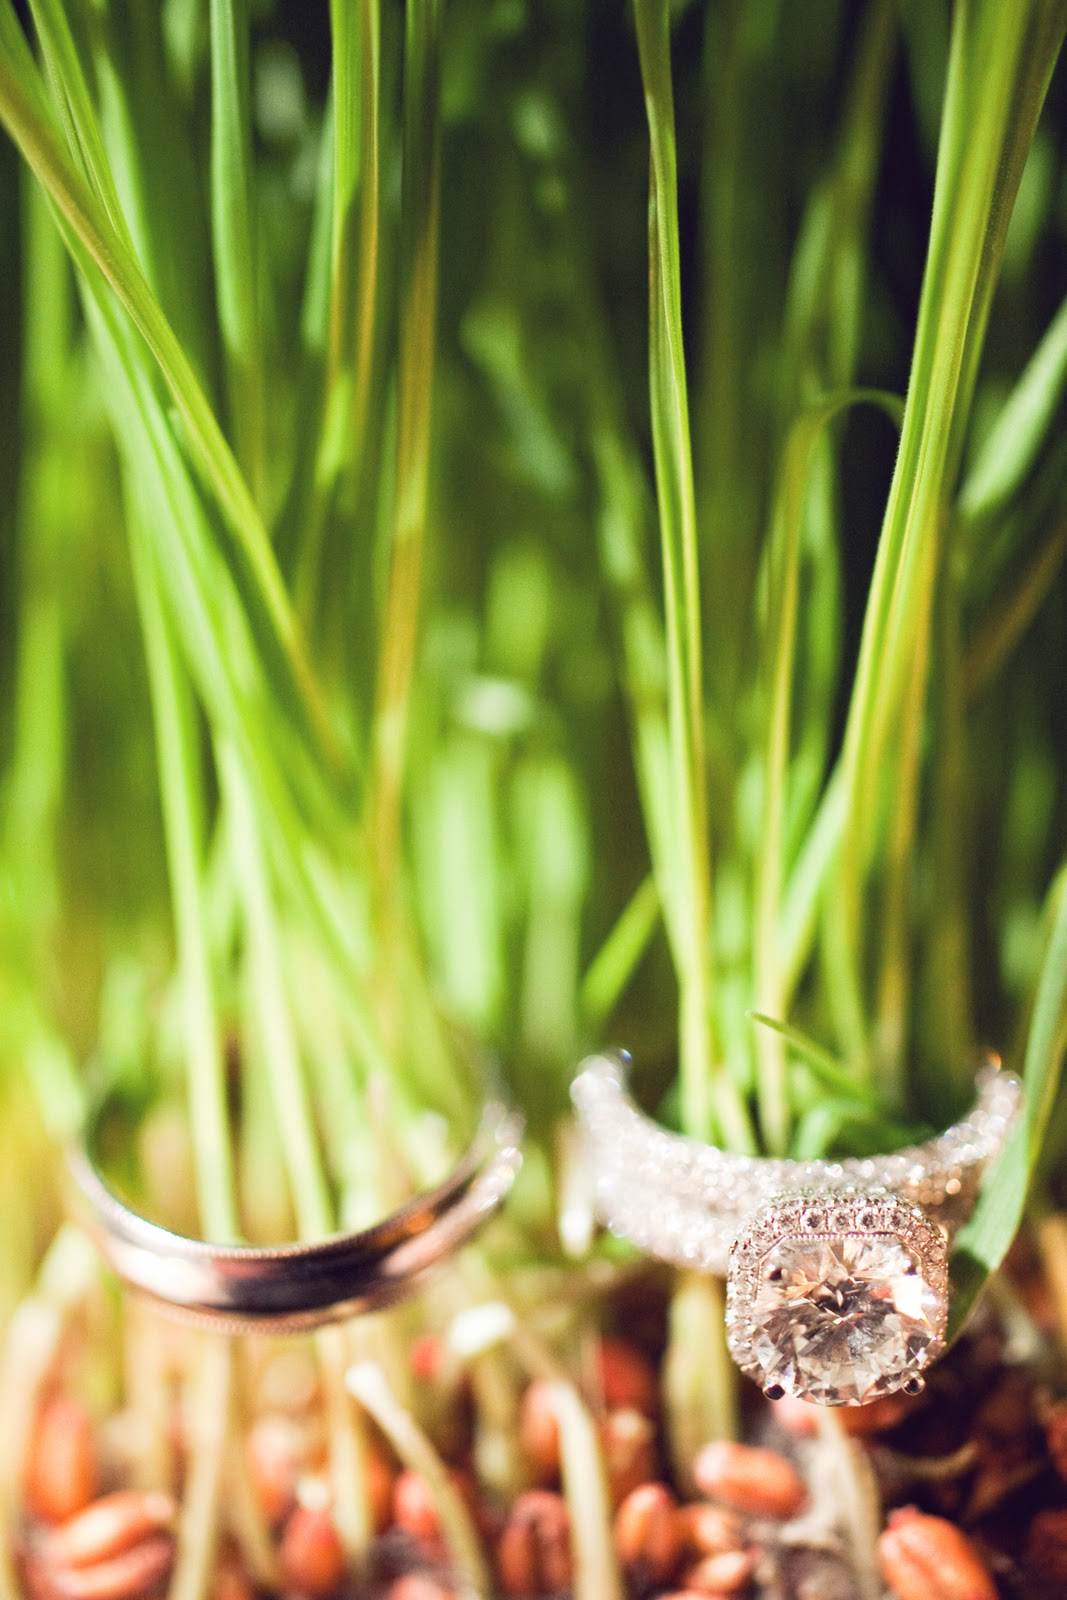 10 Year Wedding Anniversary by popular Nashville lifestyle blog, Hello Happiness: image of wedding bands resting on some wheat grass. 